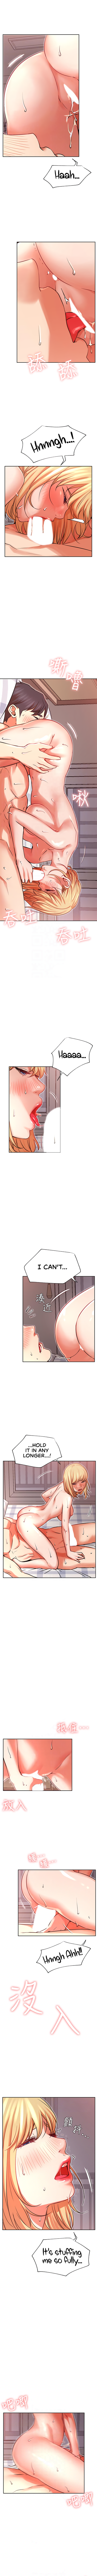 do-you-want-to-collab-chap-33-1